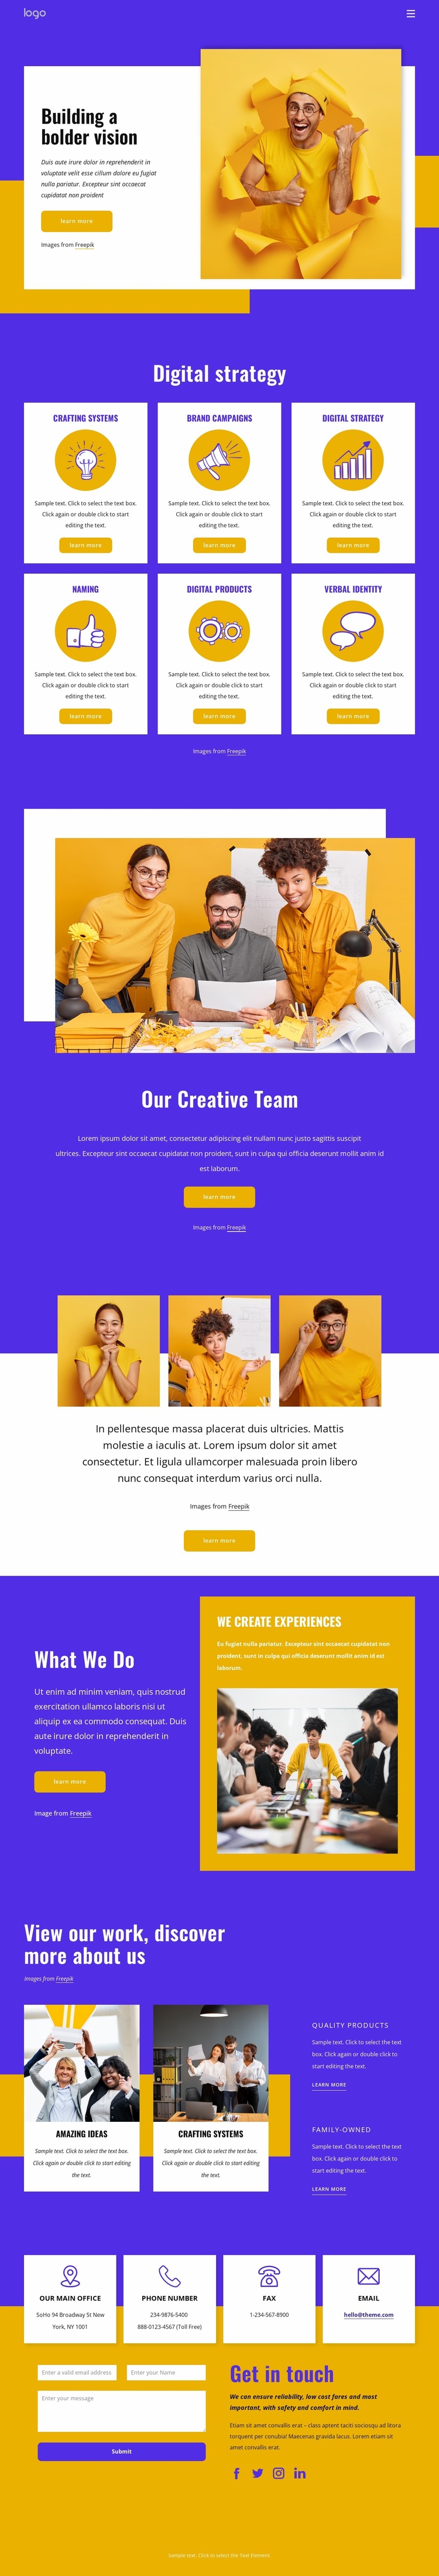 UX design and branding agency Landing Page